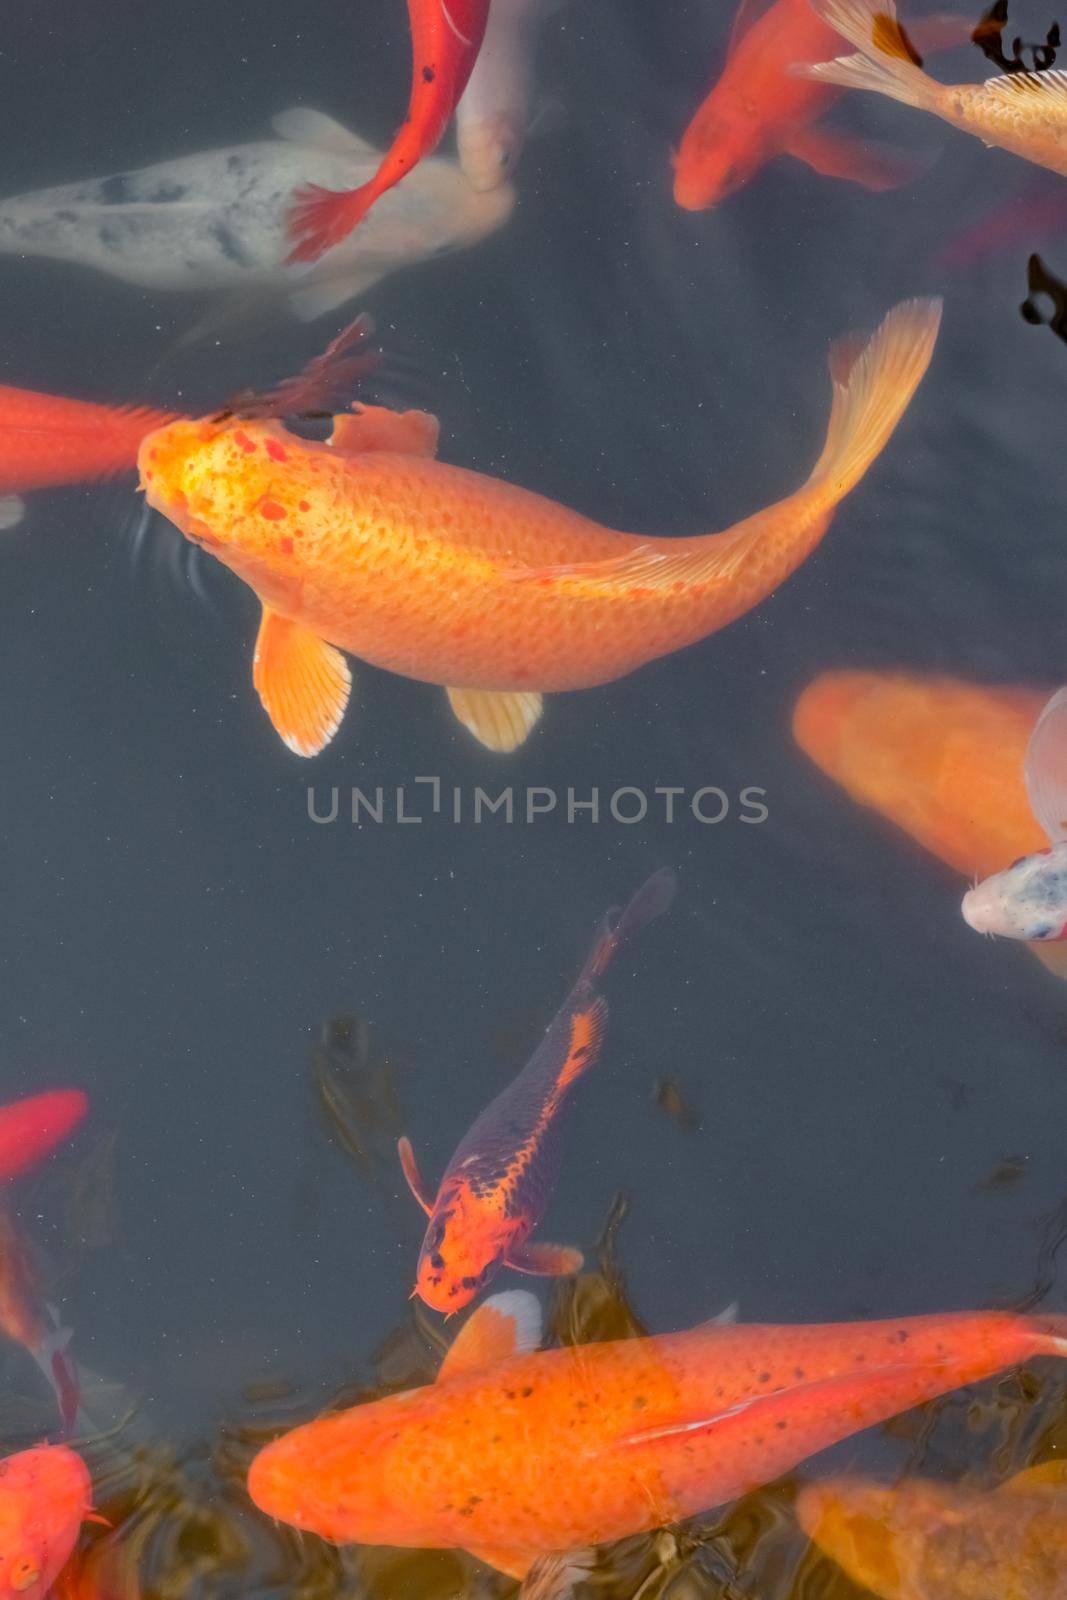 carp Chinese koi colorful fish swim in the water top view of the entire frame  by roman112007